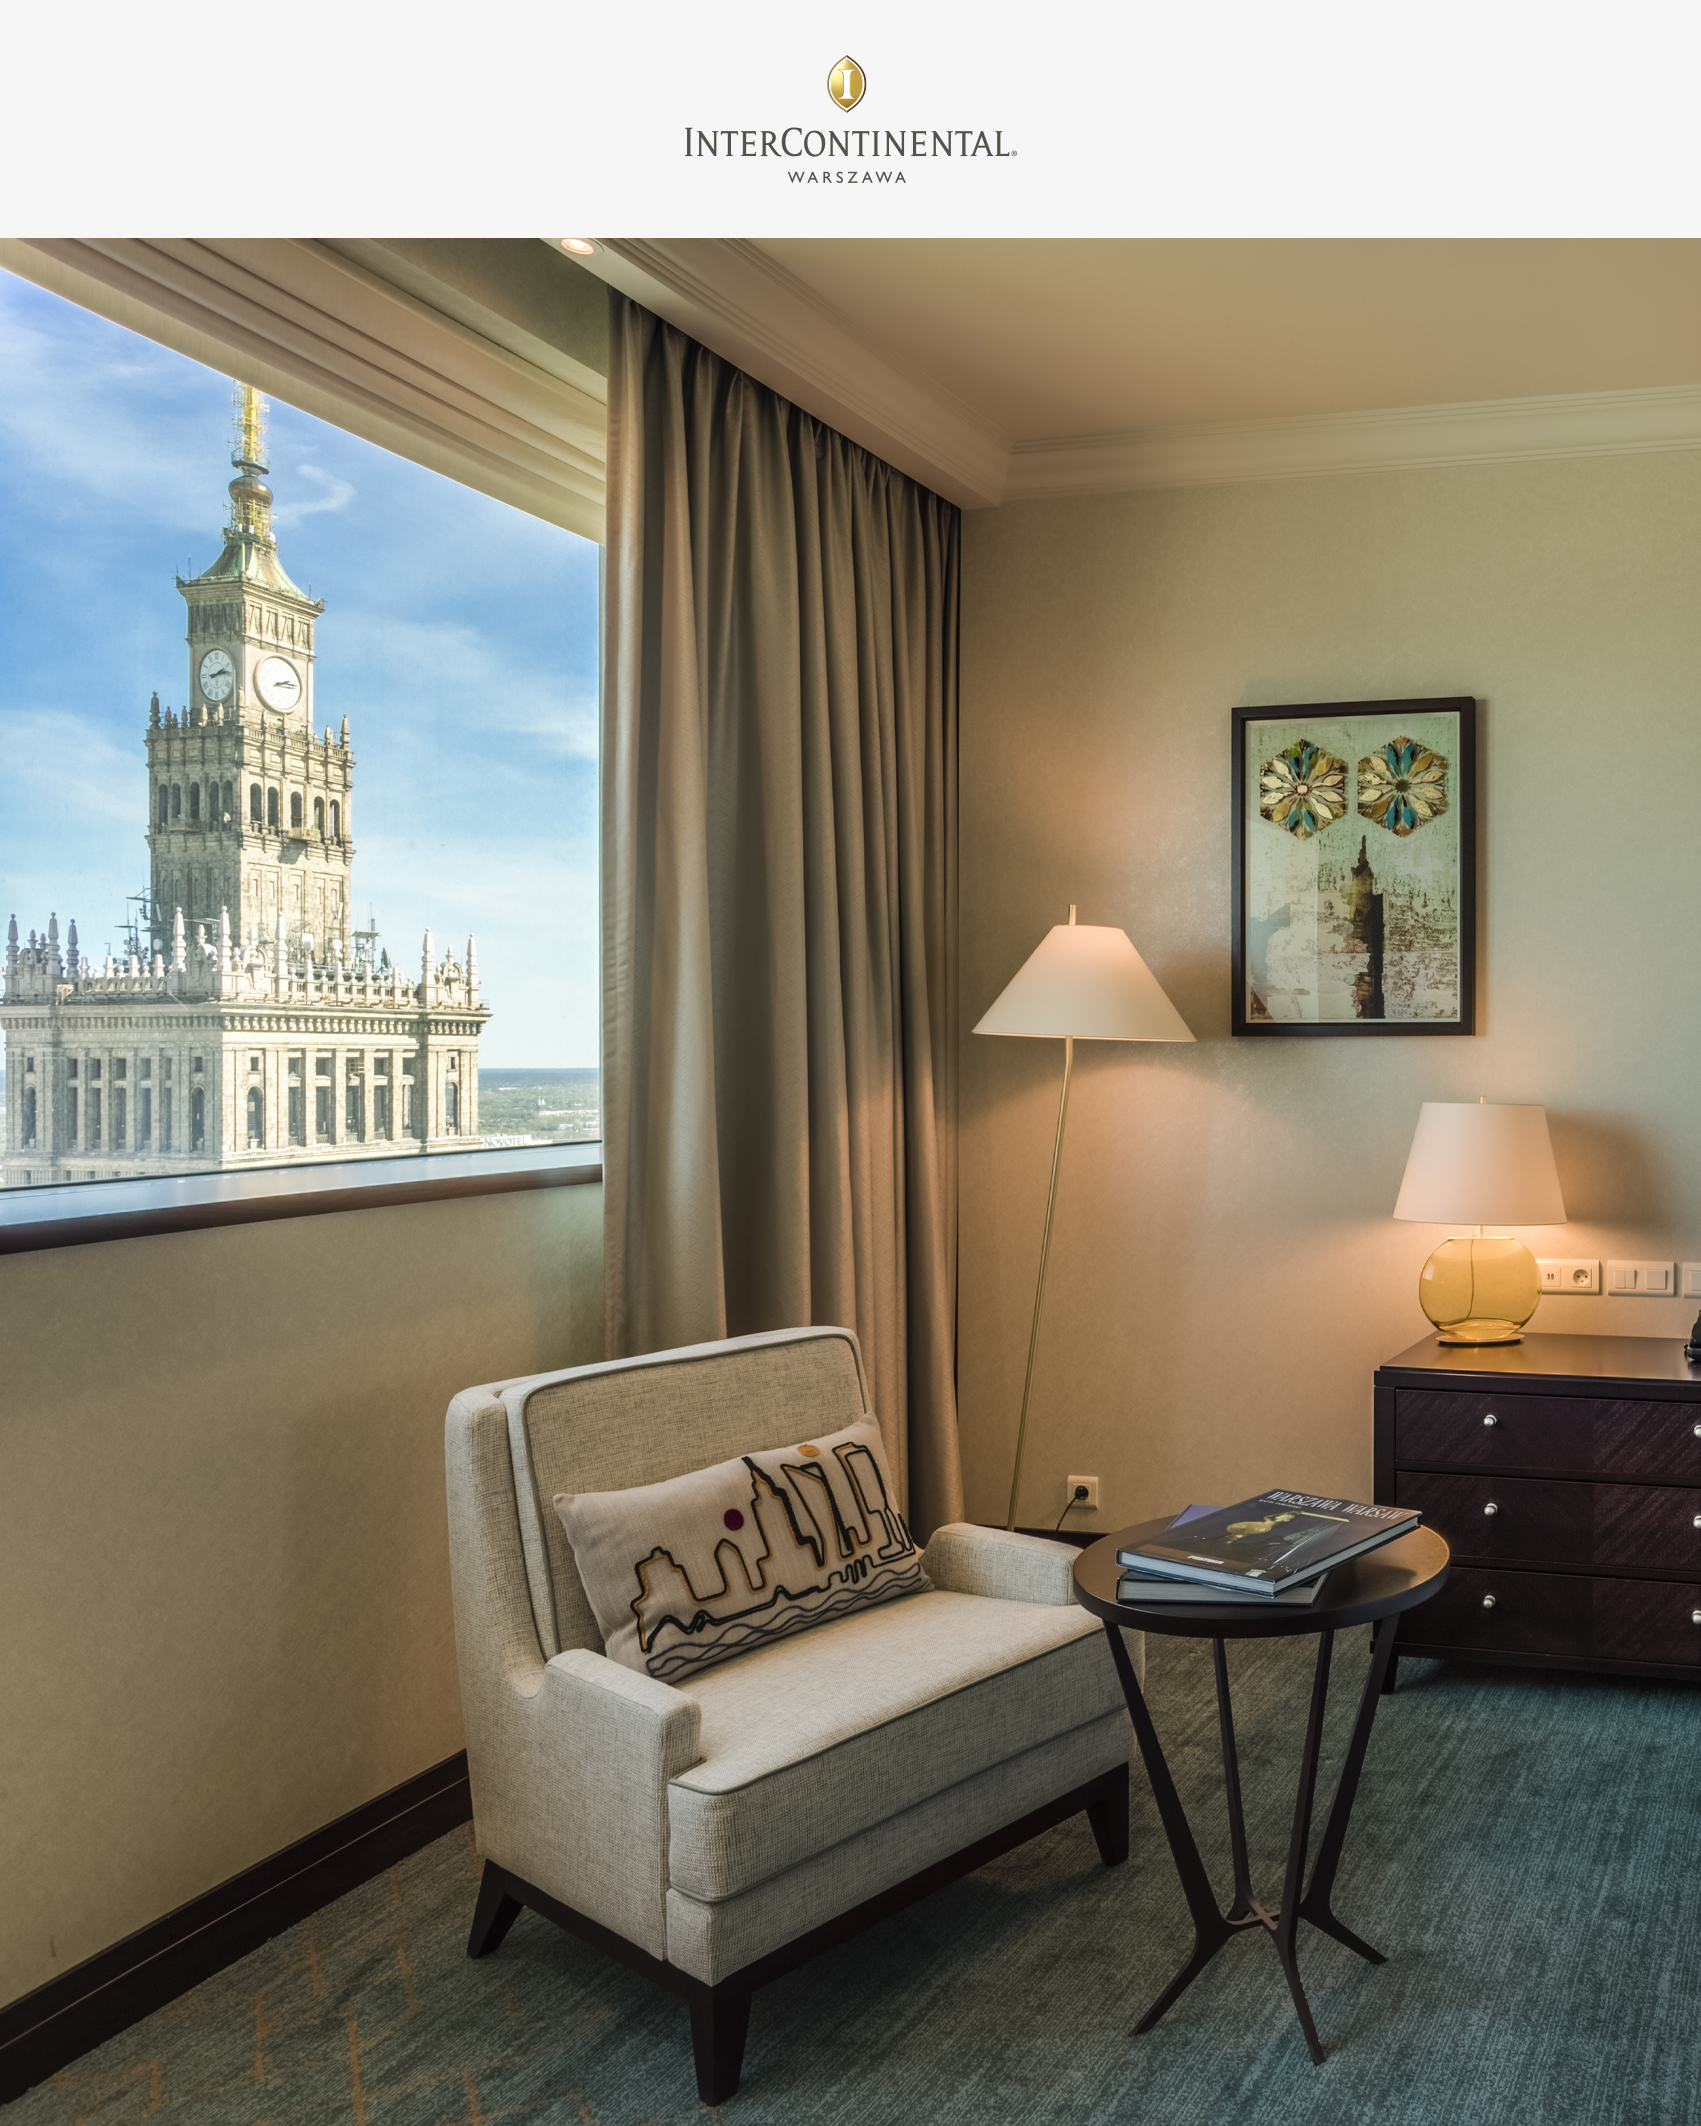 Stay in a Classic Room on a High Floor with a view of the Palace of Culture and Science (1 night / 2 people)